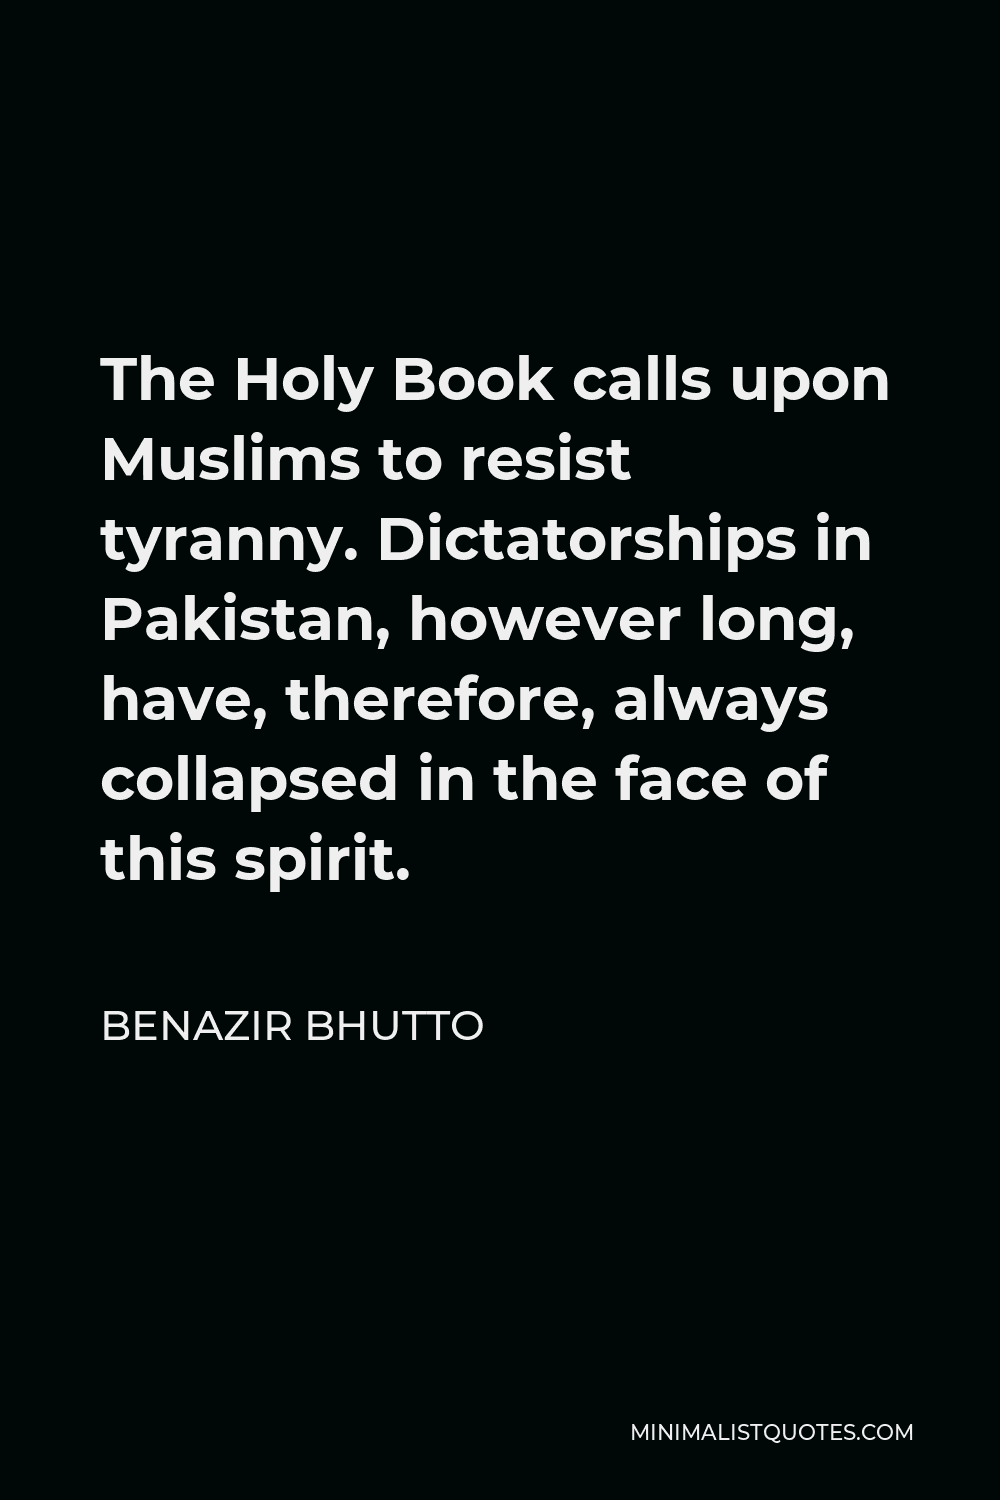 Benazir Bhutto Quote - The Holy Book calls upon Muslims to resist tyranny. Dictatorships in Pakistan, however long, have, therefore, always collapsed in the face of this spirit.